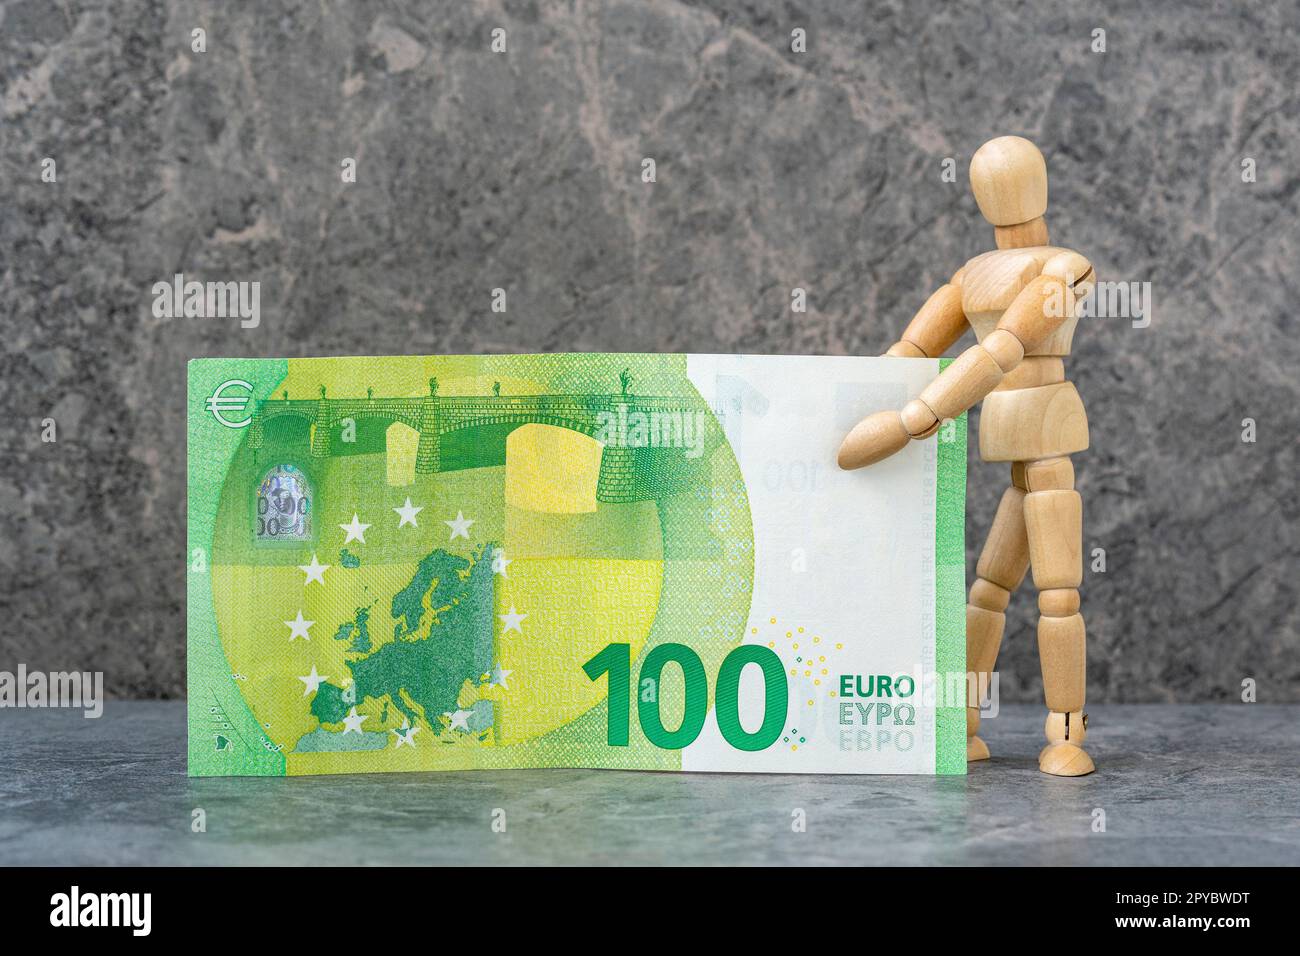 Wooden mannequin holding one hundred Euro banknote Stock Photo